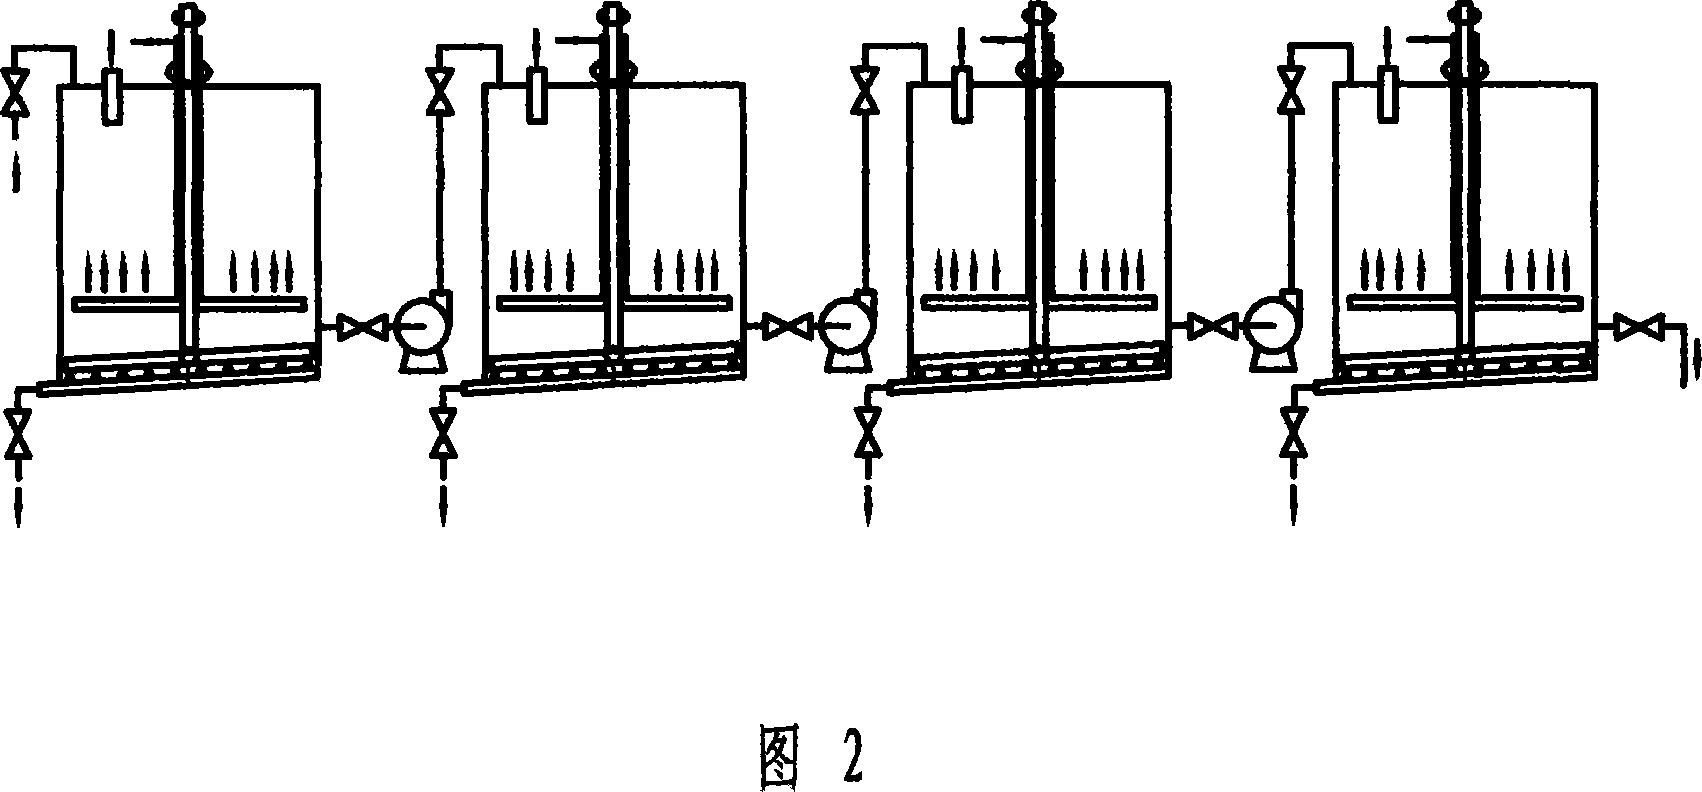 Method for treating sewage water having heavy metallic ion Cd2+ and Cu2+ by using bacteria 575